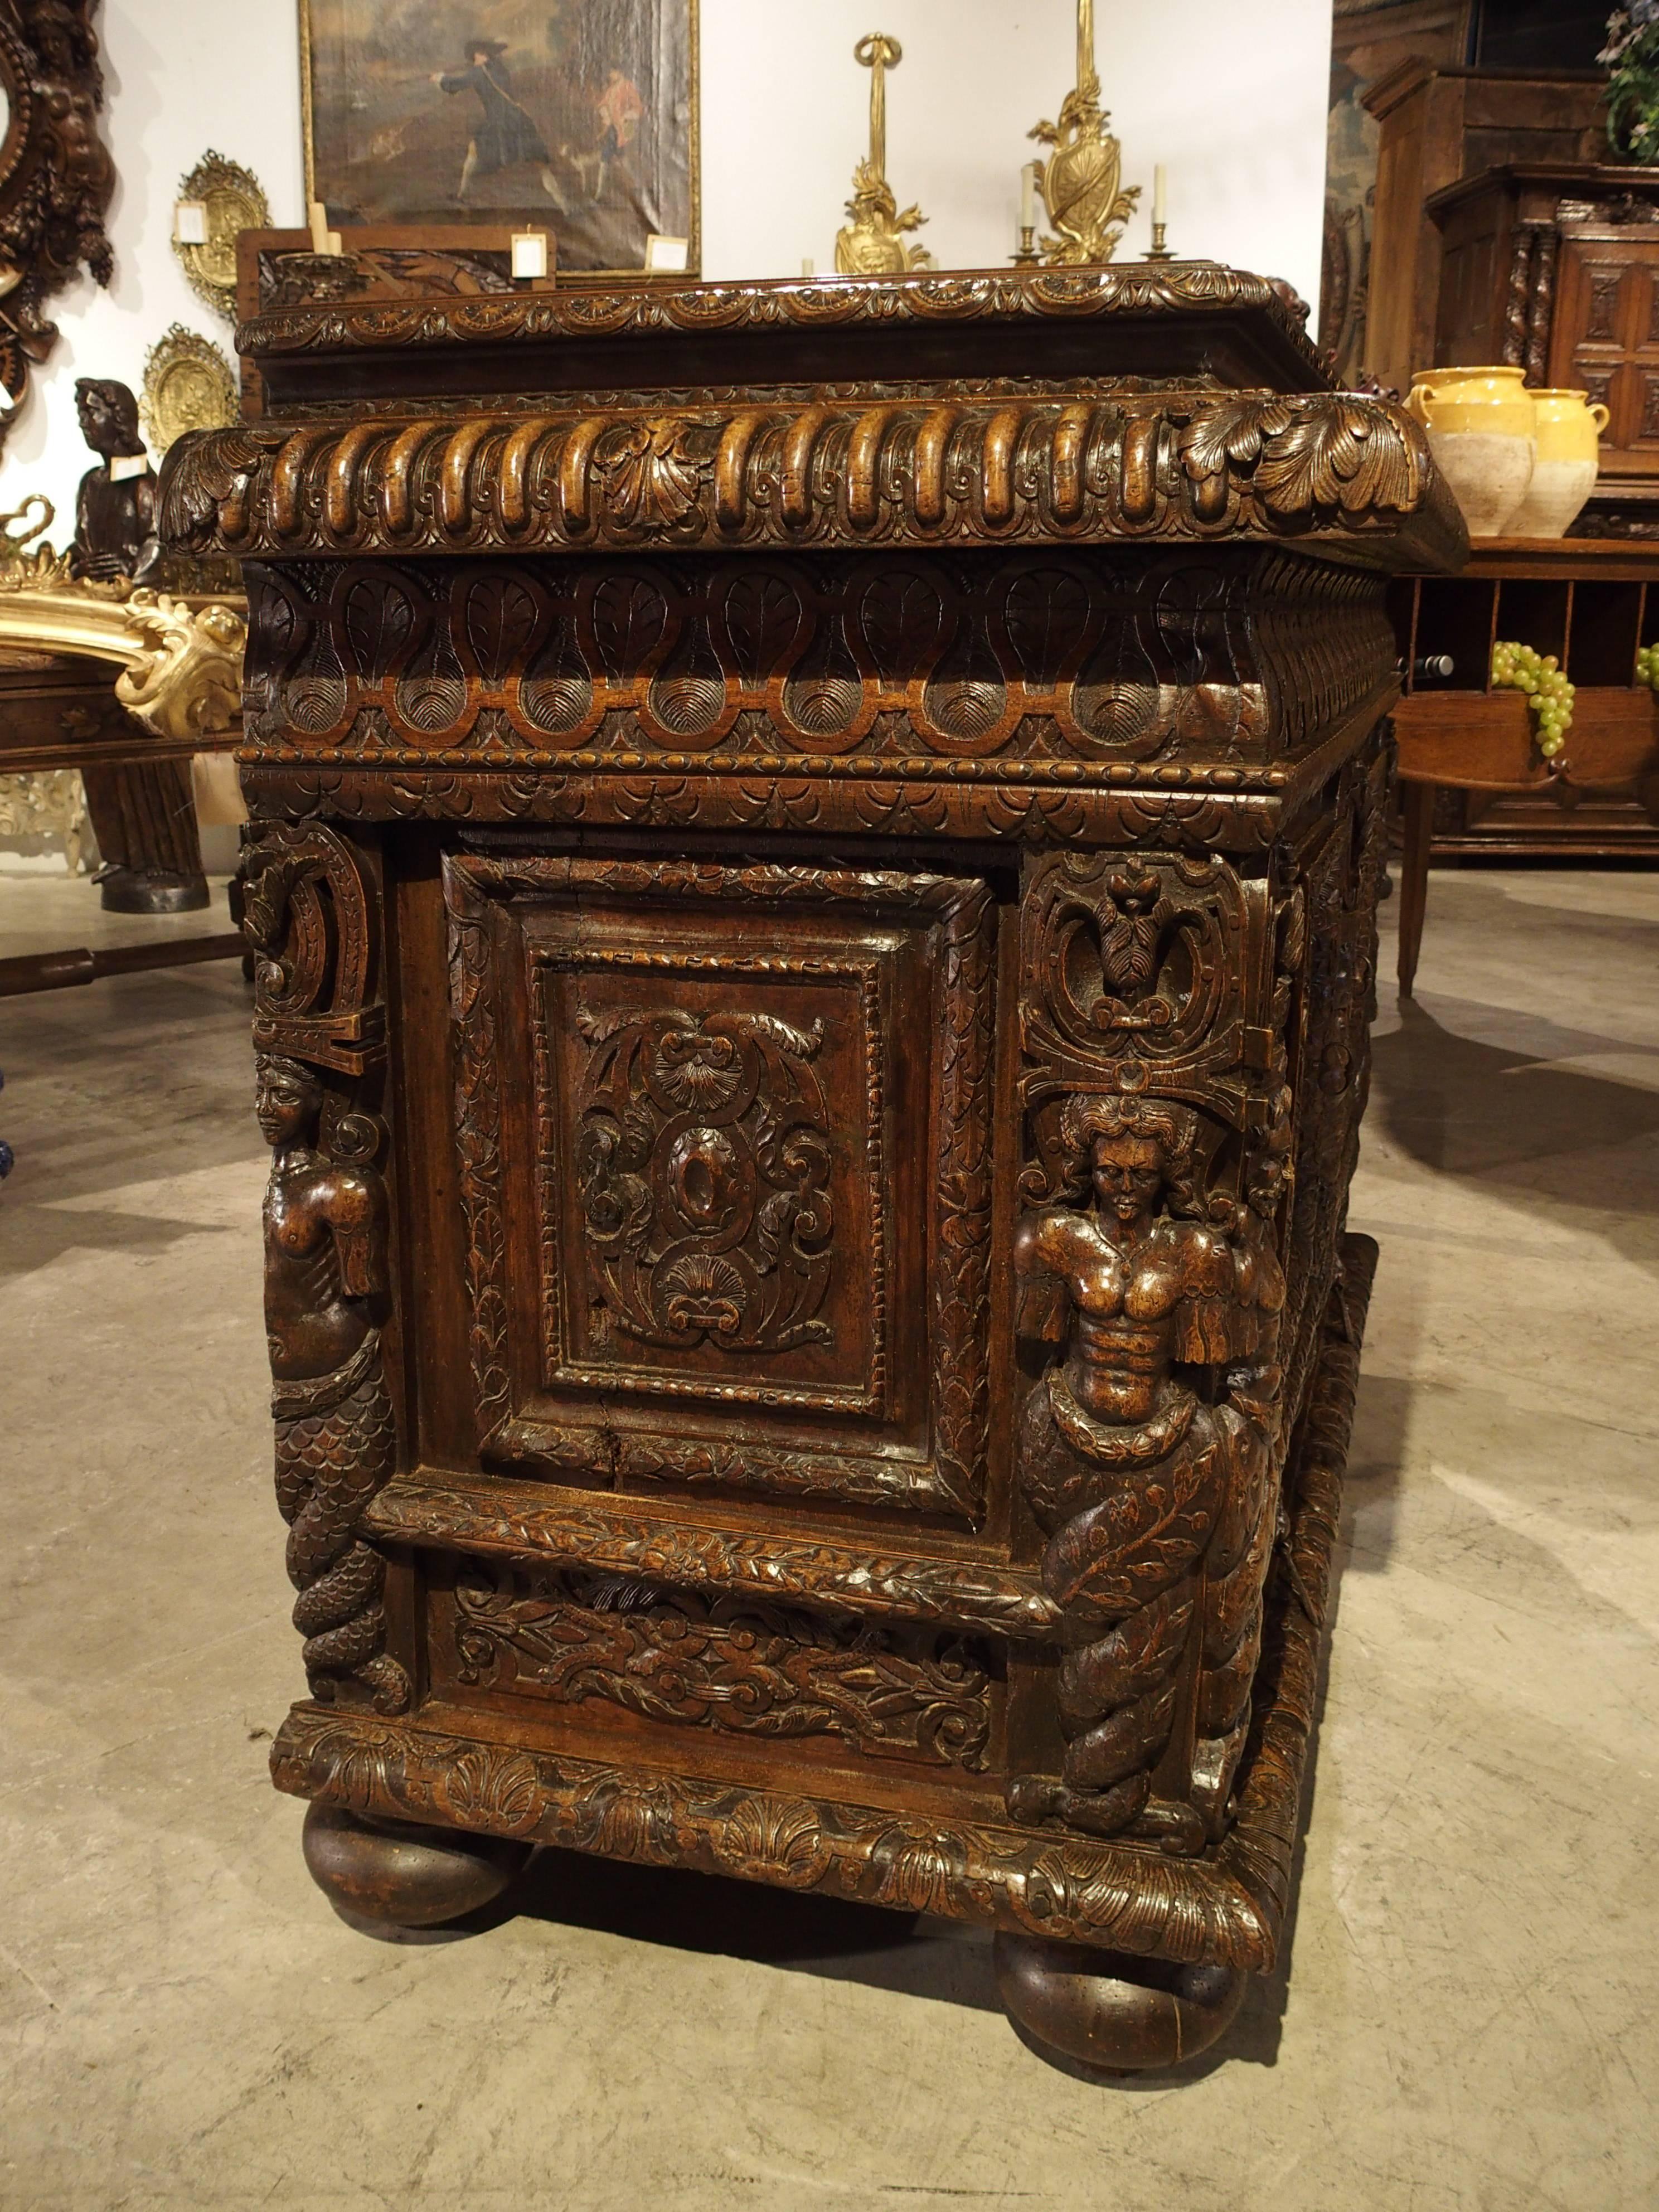 This richly decorated antique French walnut wood buffet has some of the most intricate and tiny carvings that are still visible after several hundred years. It is composed of period Renaissance elements that were mated with 1800s sections (such as